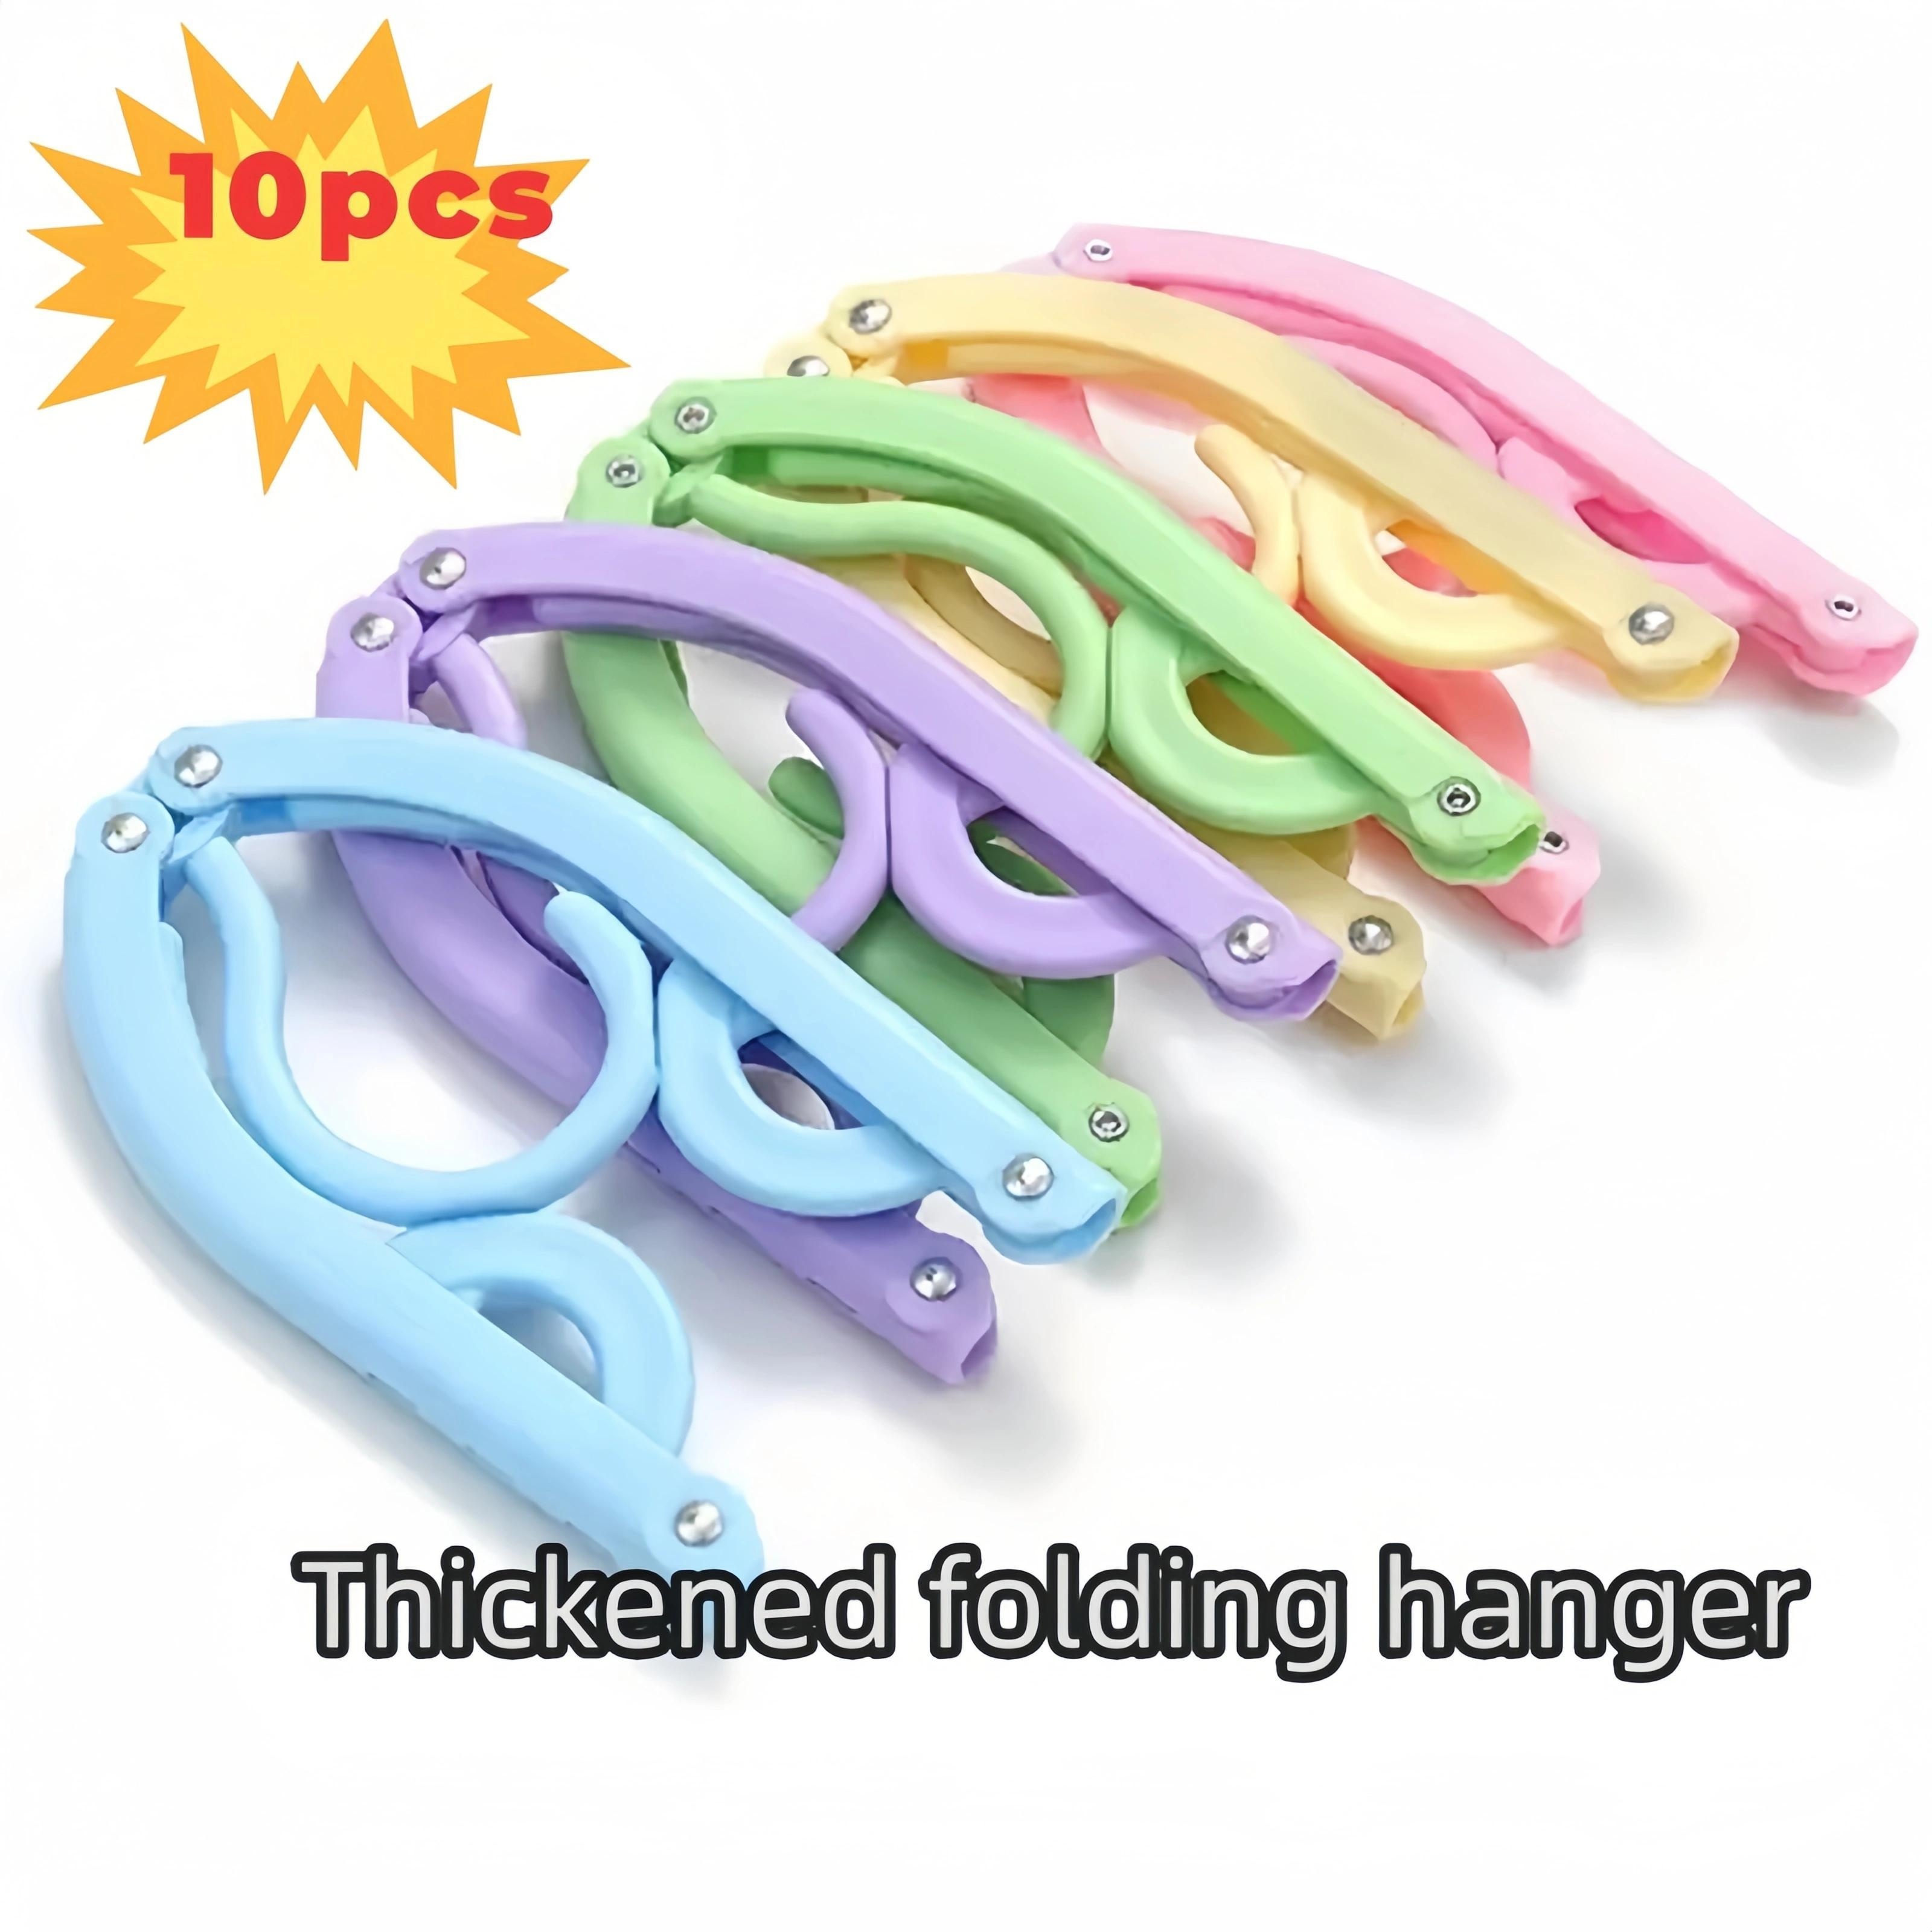 

10-piece Portable Folding Hangers - Ideal For Travel, Business Trips & Dorms | Compact Clothes Rack For Underwear, Socks & More